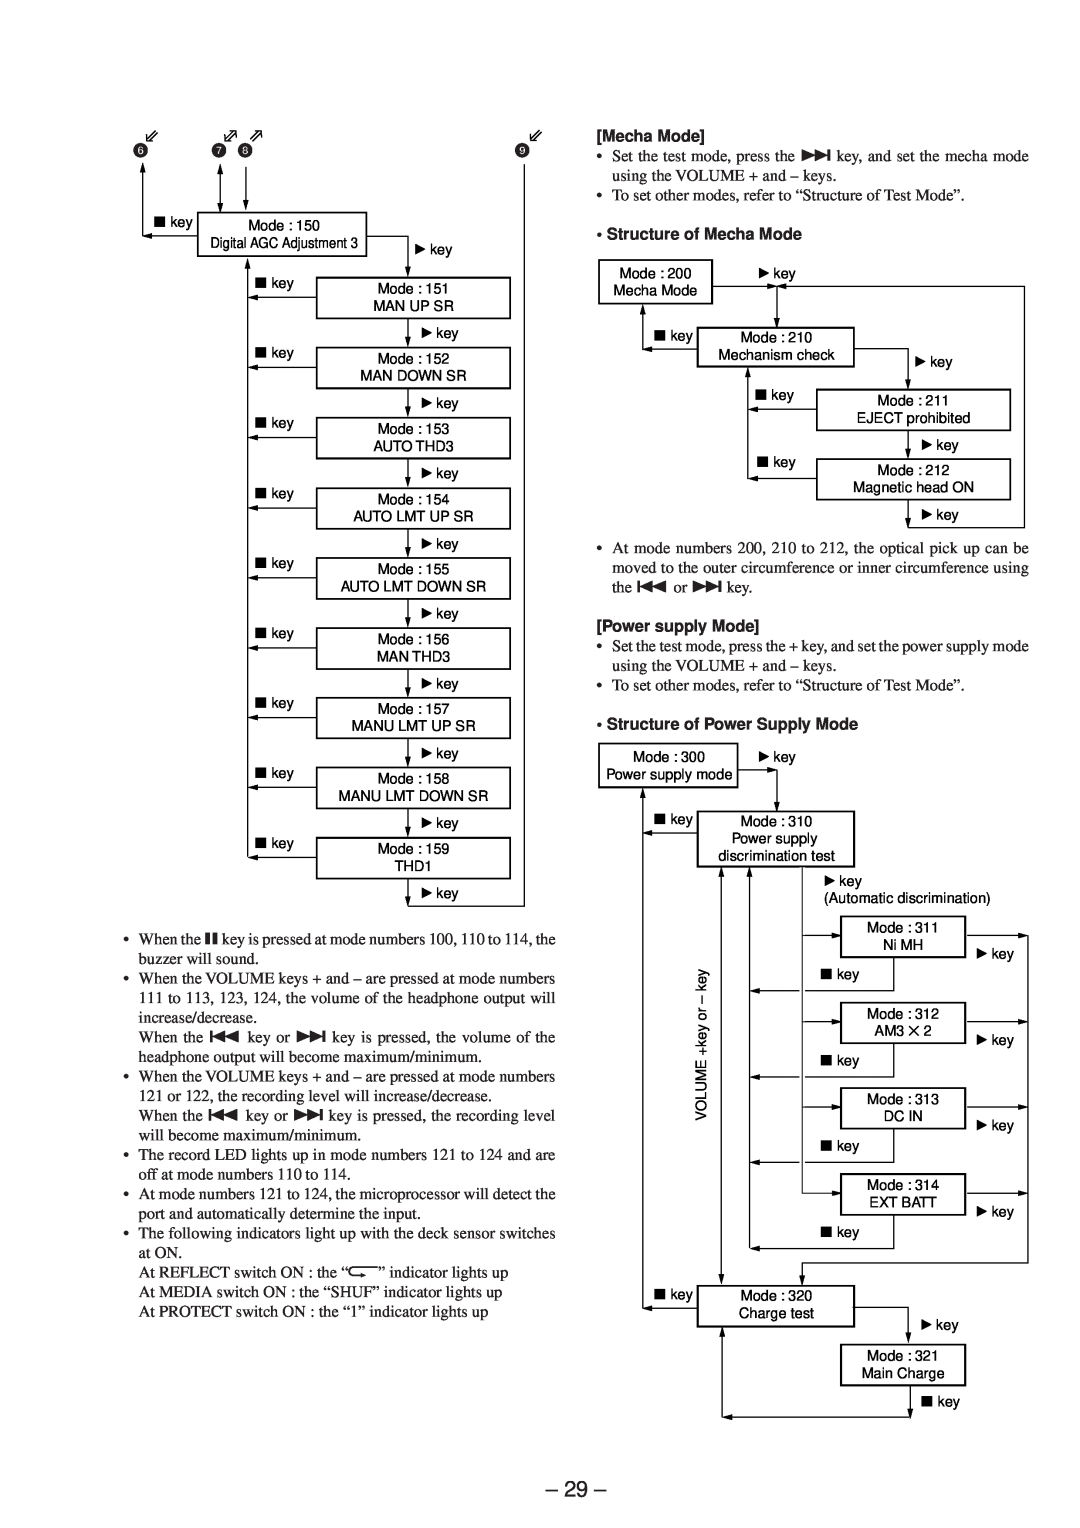 Sony MZ-R50 service manual Structure of Mecha Mode, Power supply Mode, Structure of Power Supply Mode 